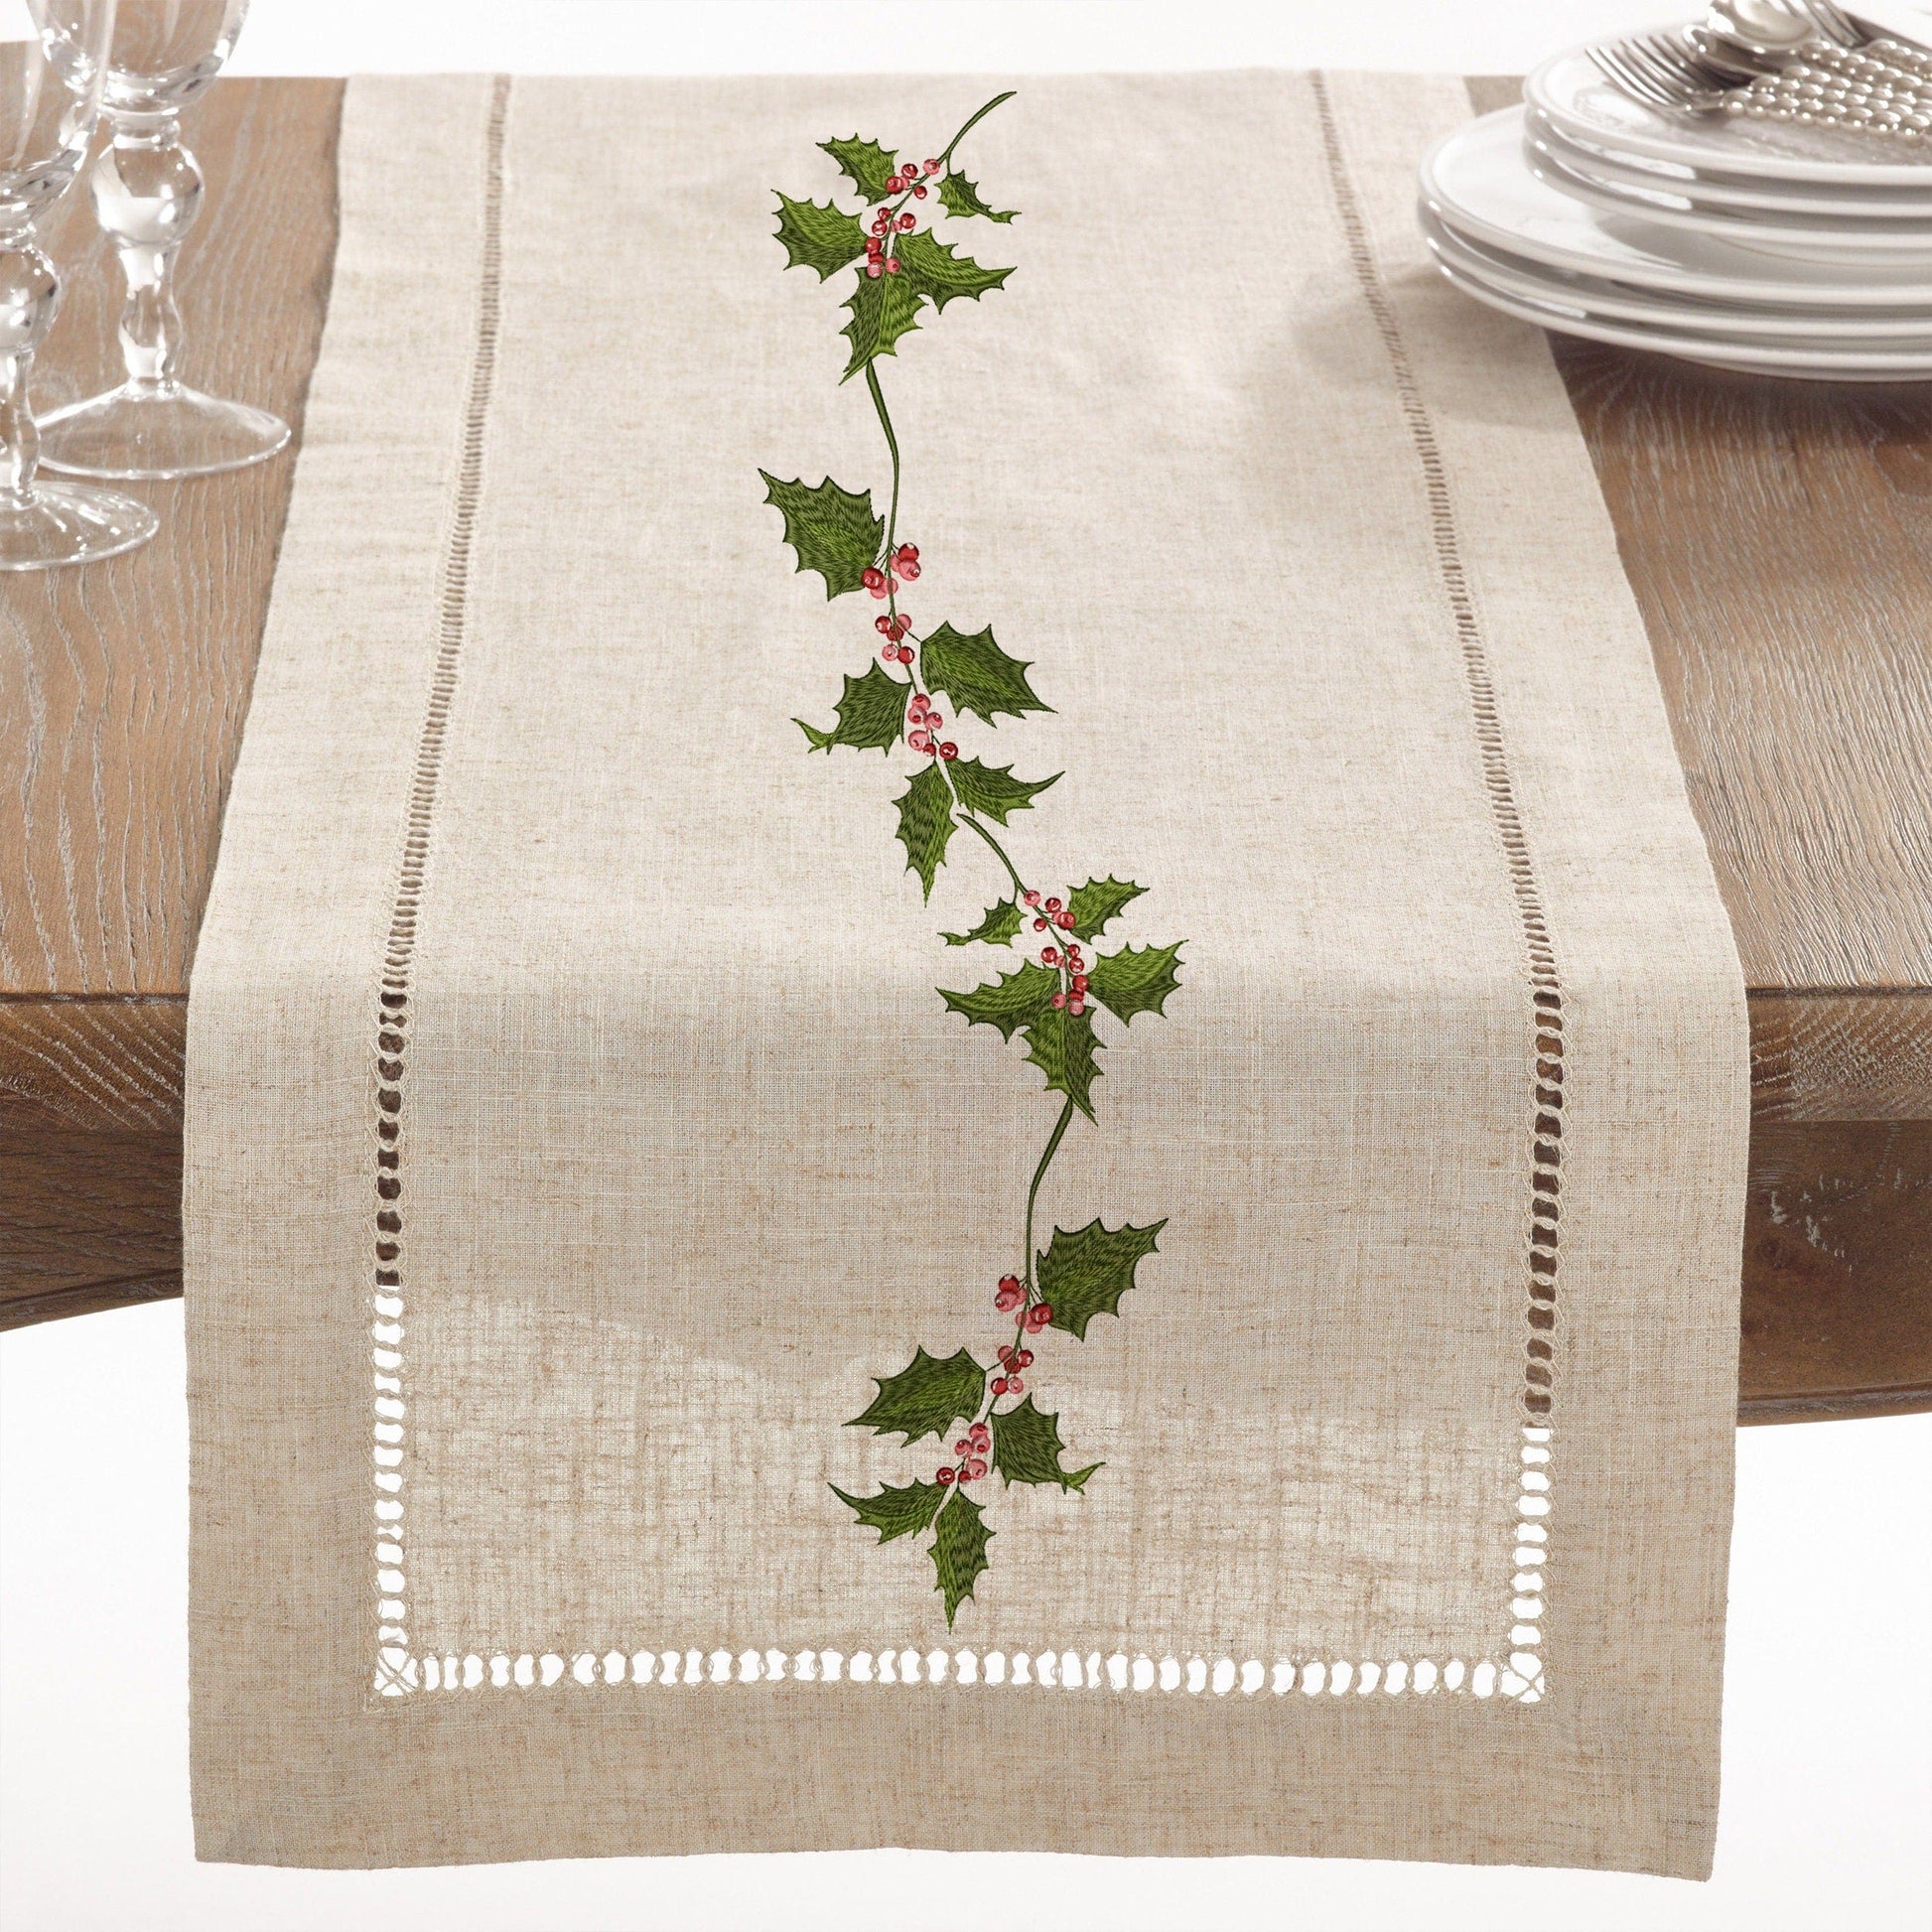 Holly Christmas Machine Embroidery Design on a table runner